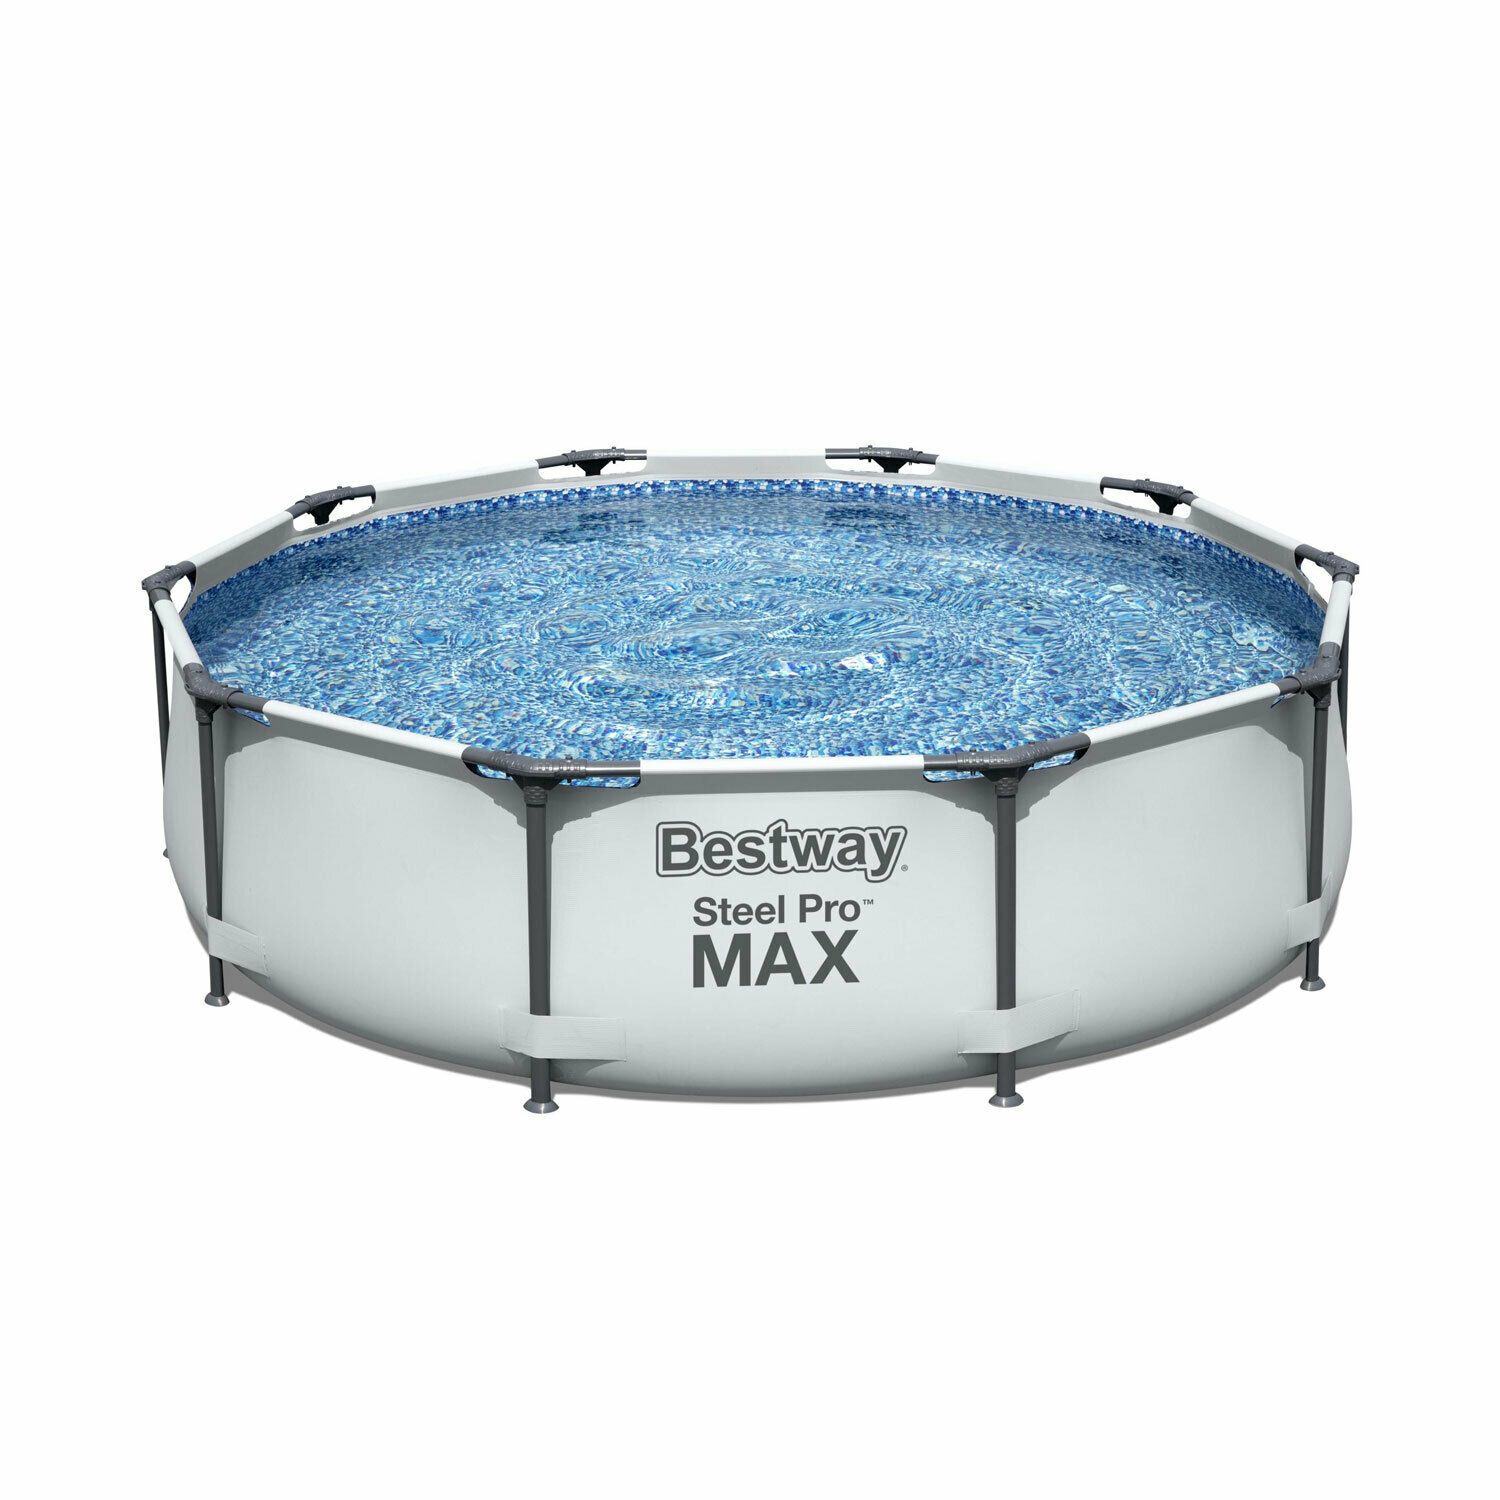 Bestway 10' x 30" Steel Pro Frame Max Round Above Ground Swimming Pool with Pump